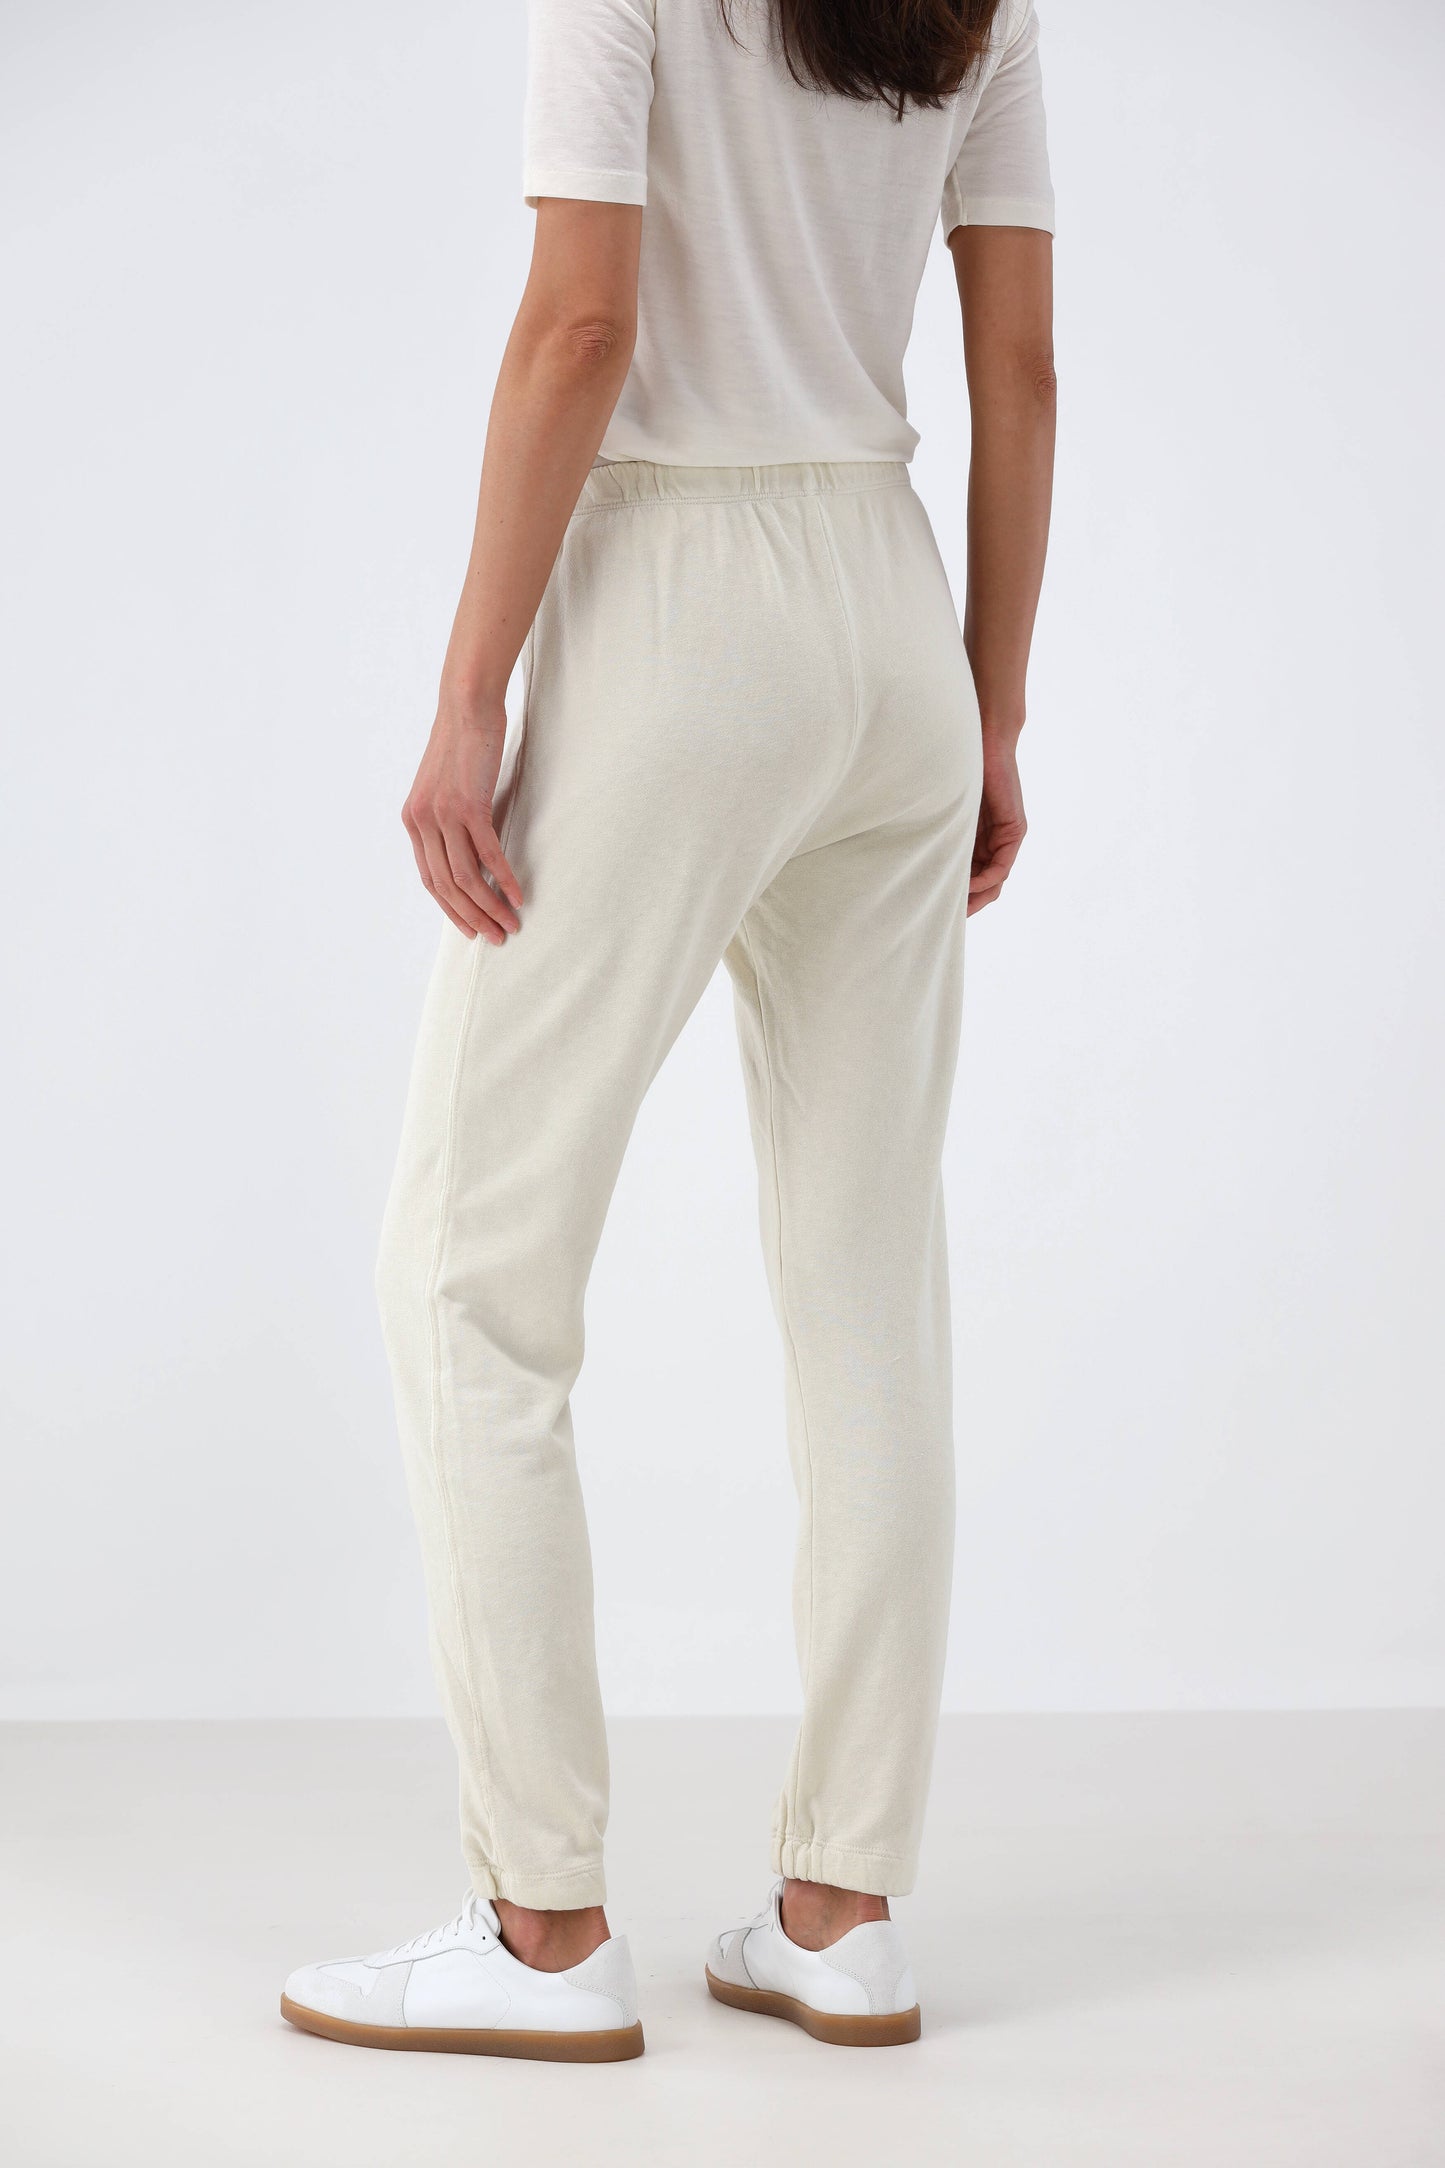 Sweatpants French Terry in MarshmallowJames Perse - Anita Hass